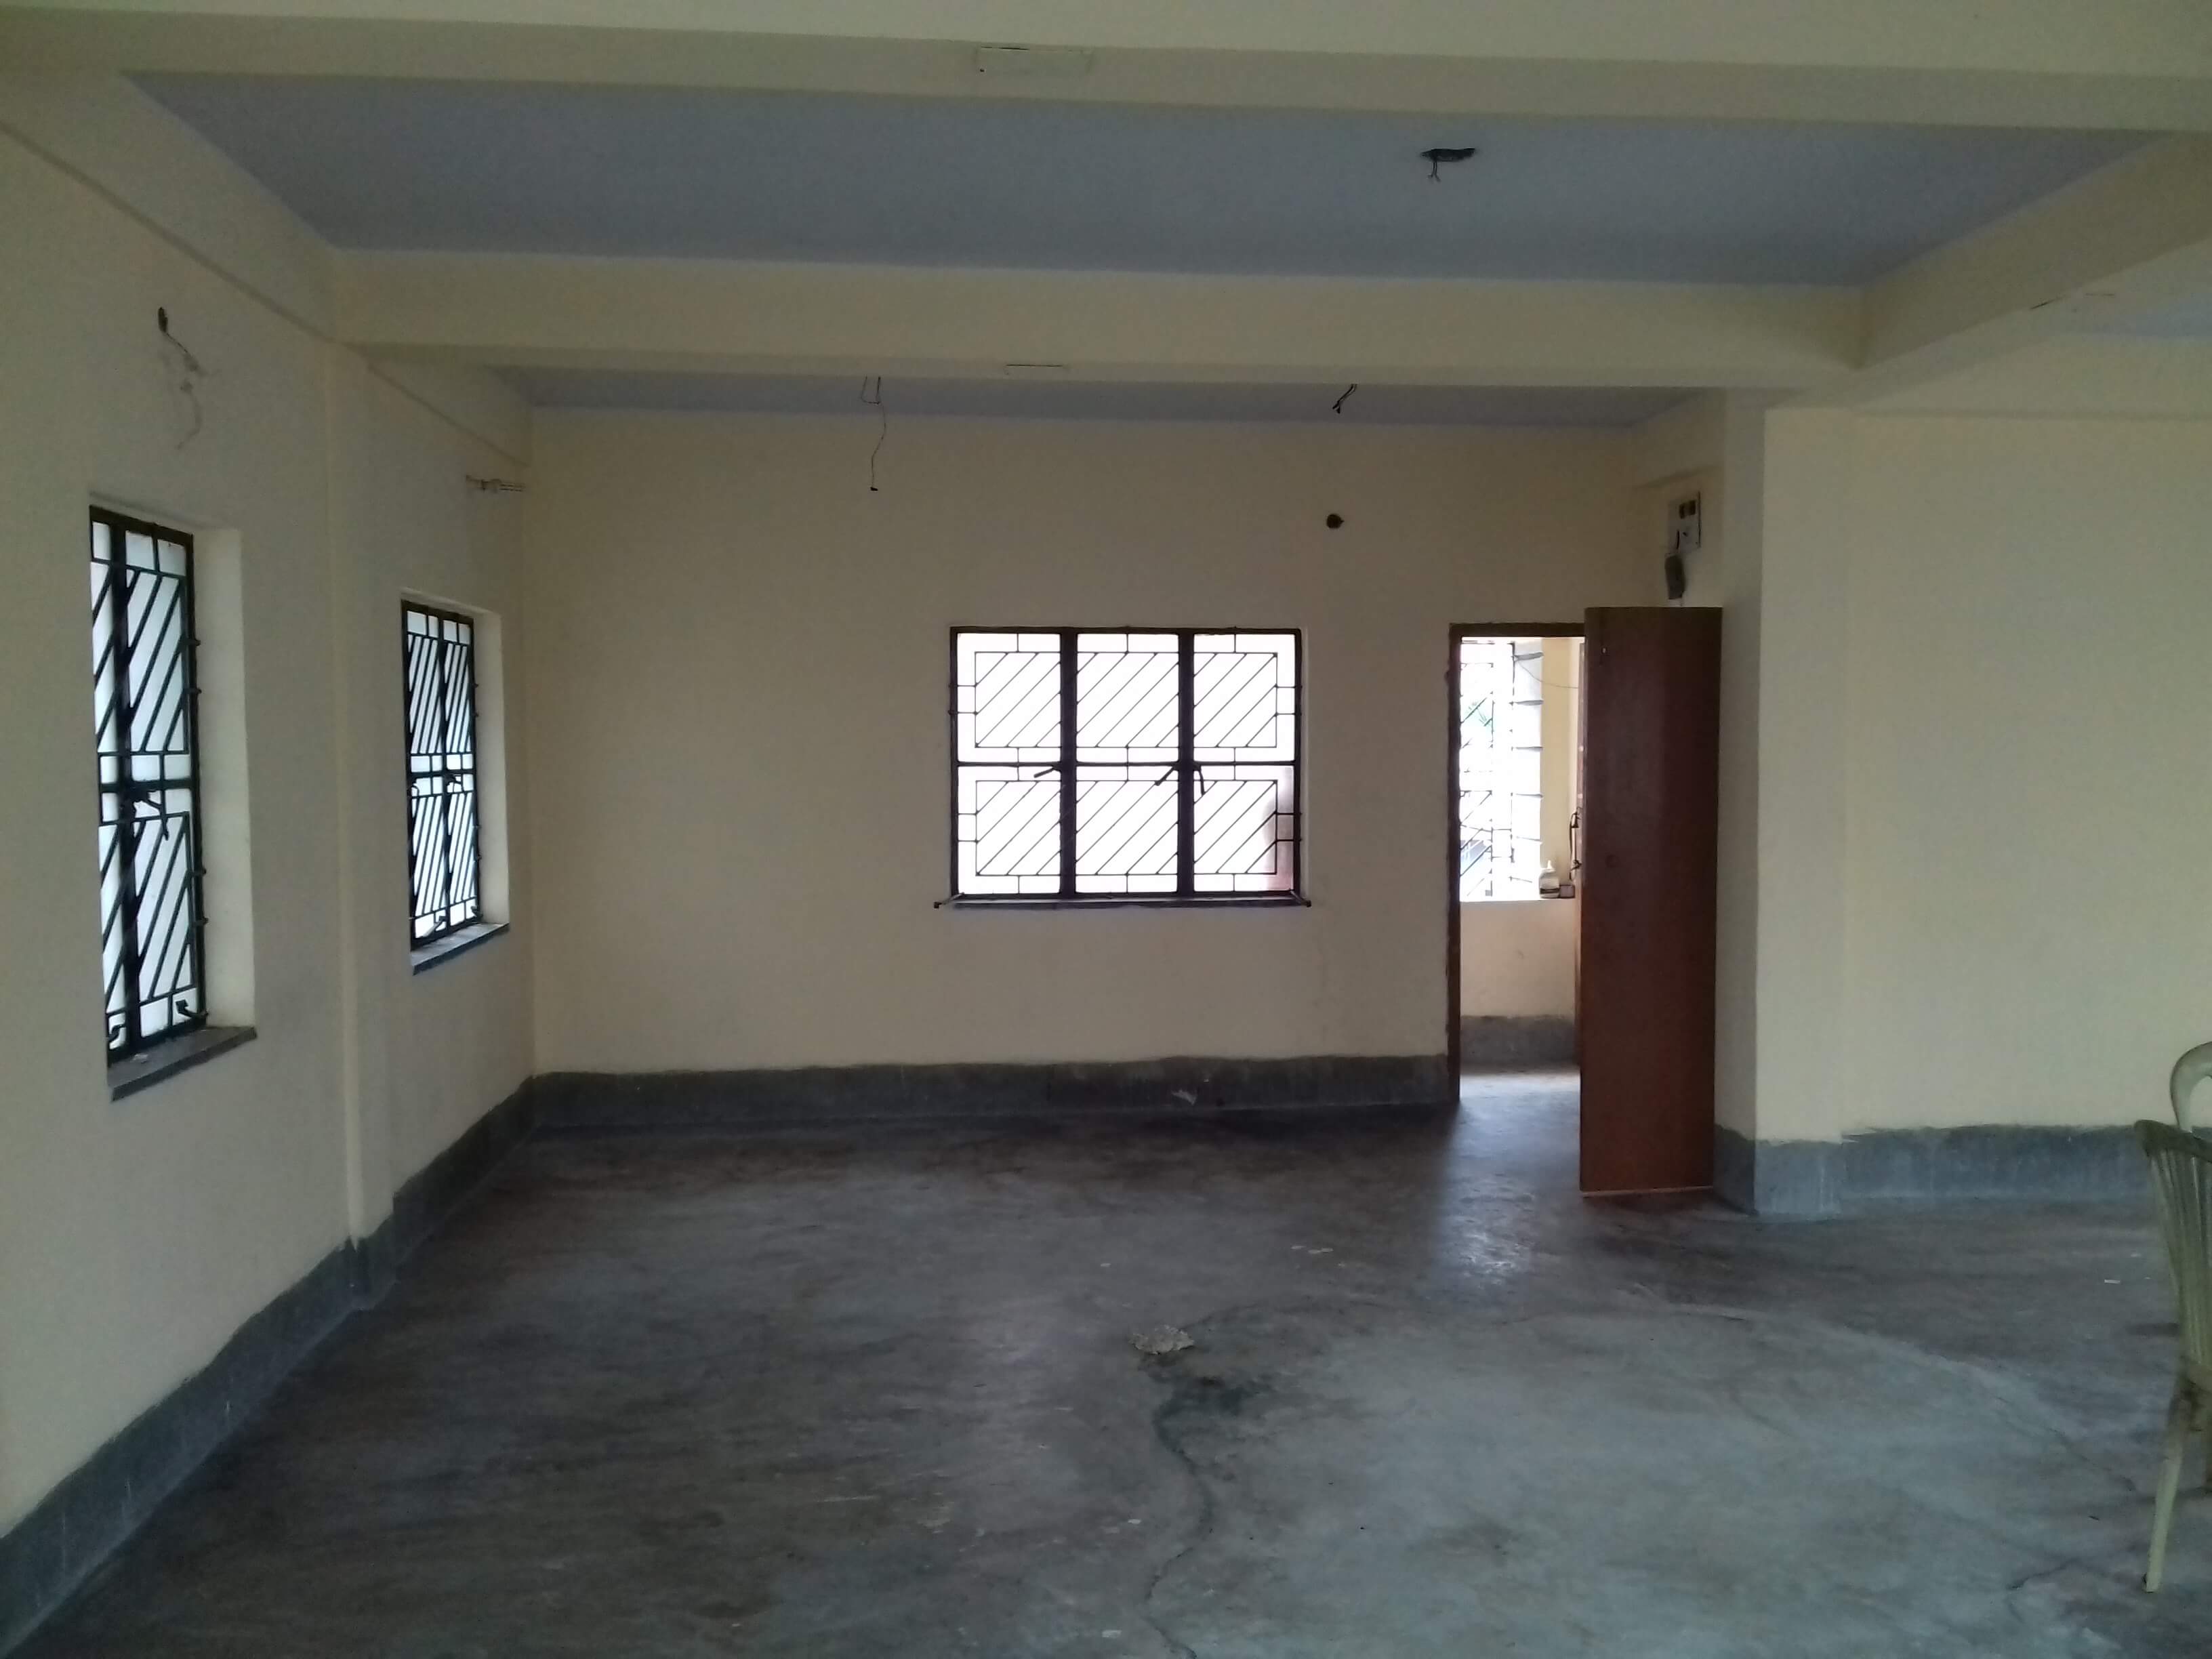 Office For Rent in Hiland Park Kolkata (Id: 3820)